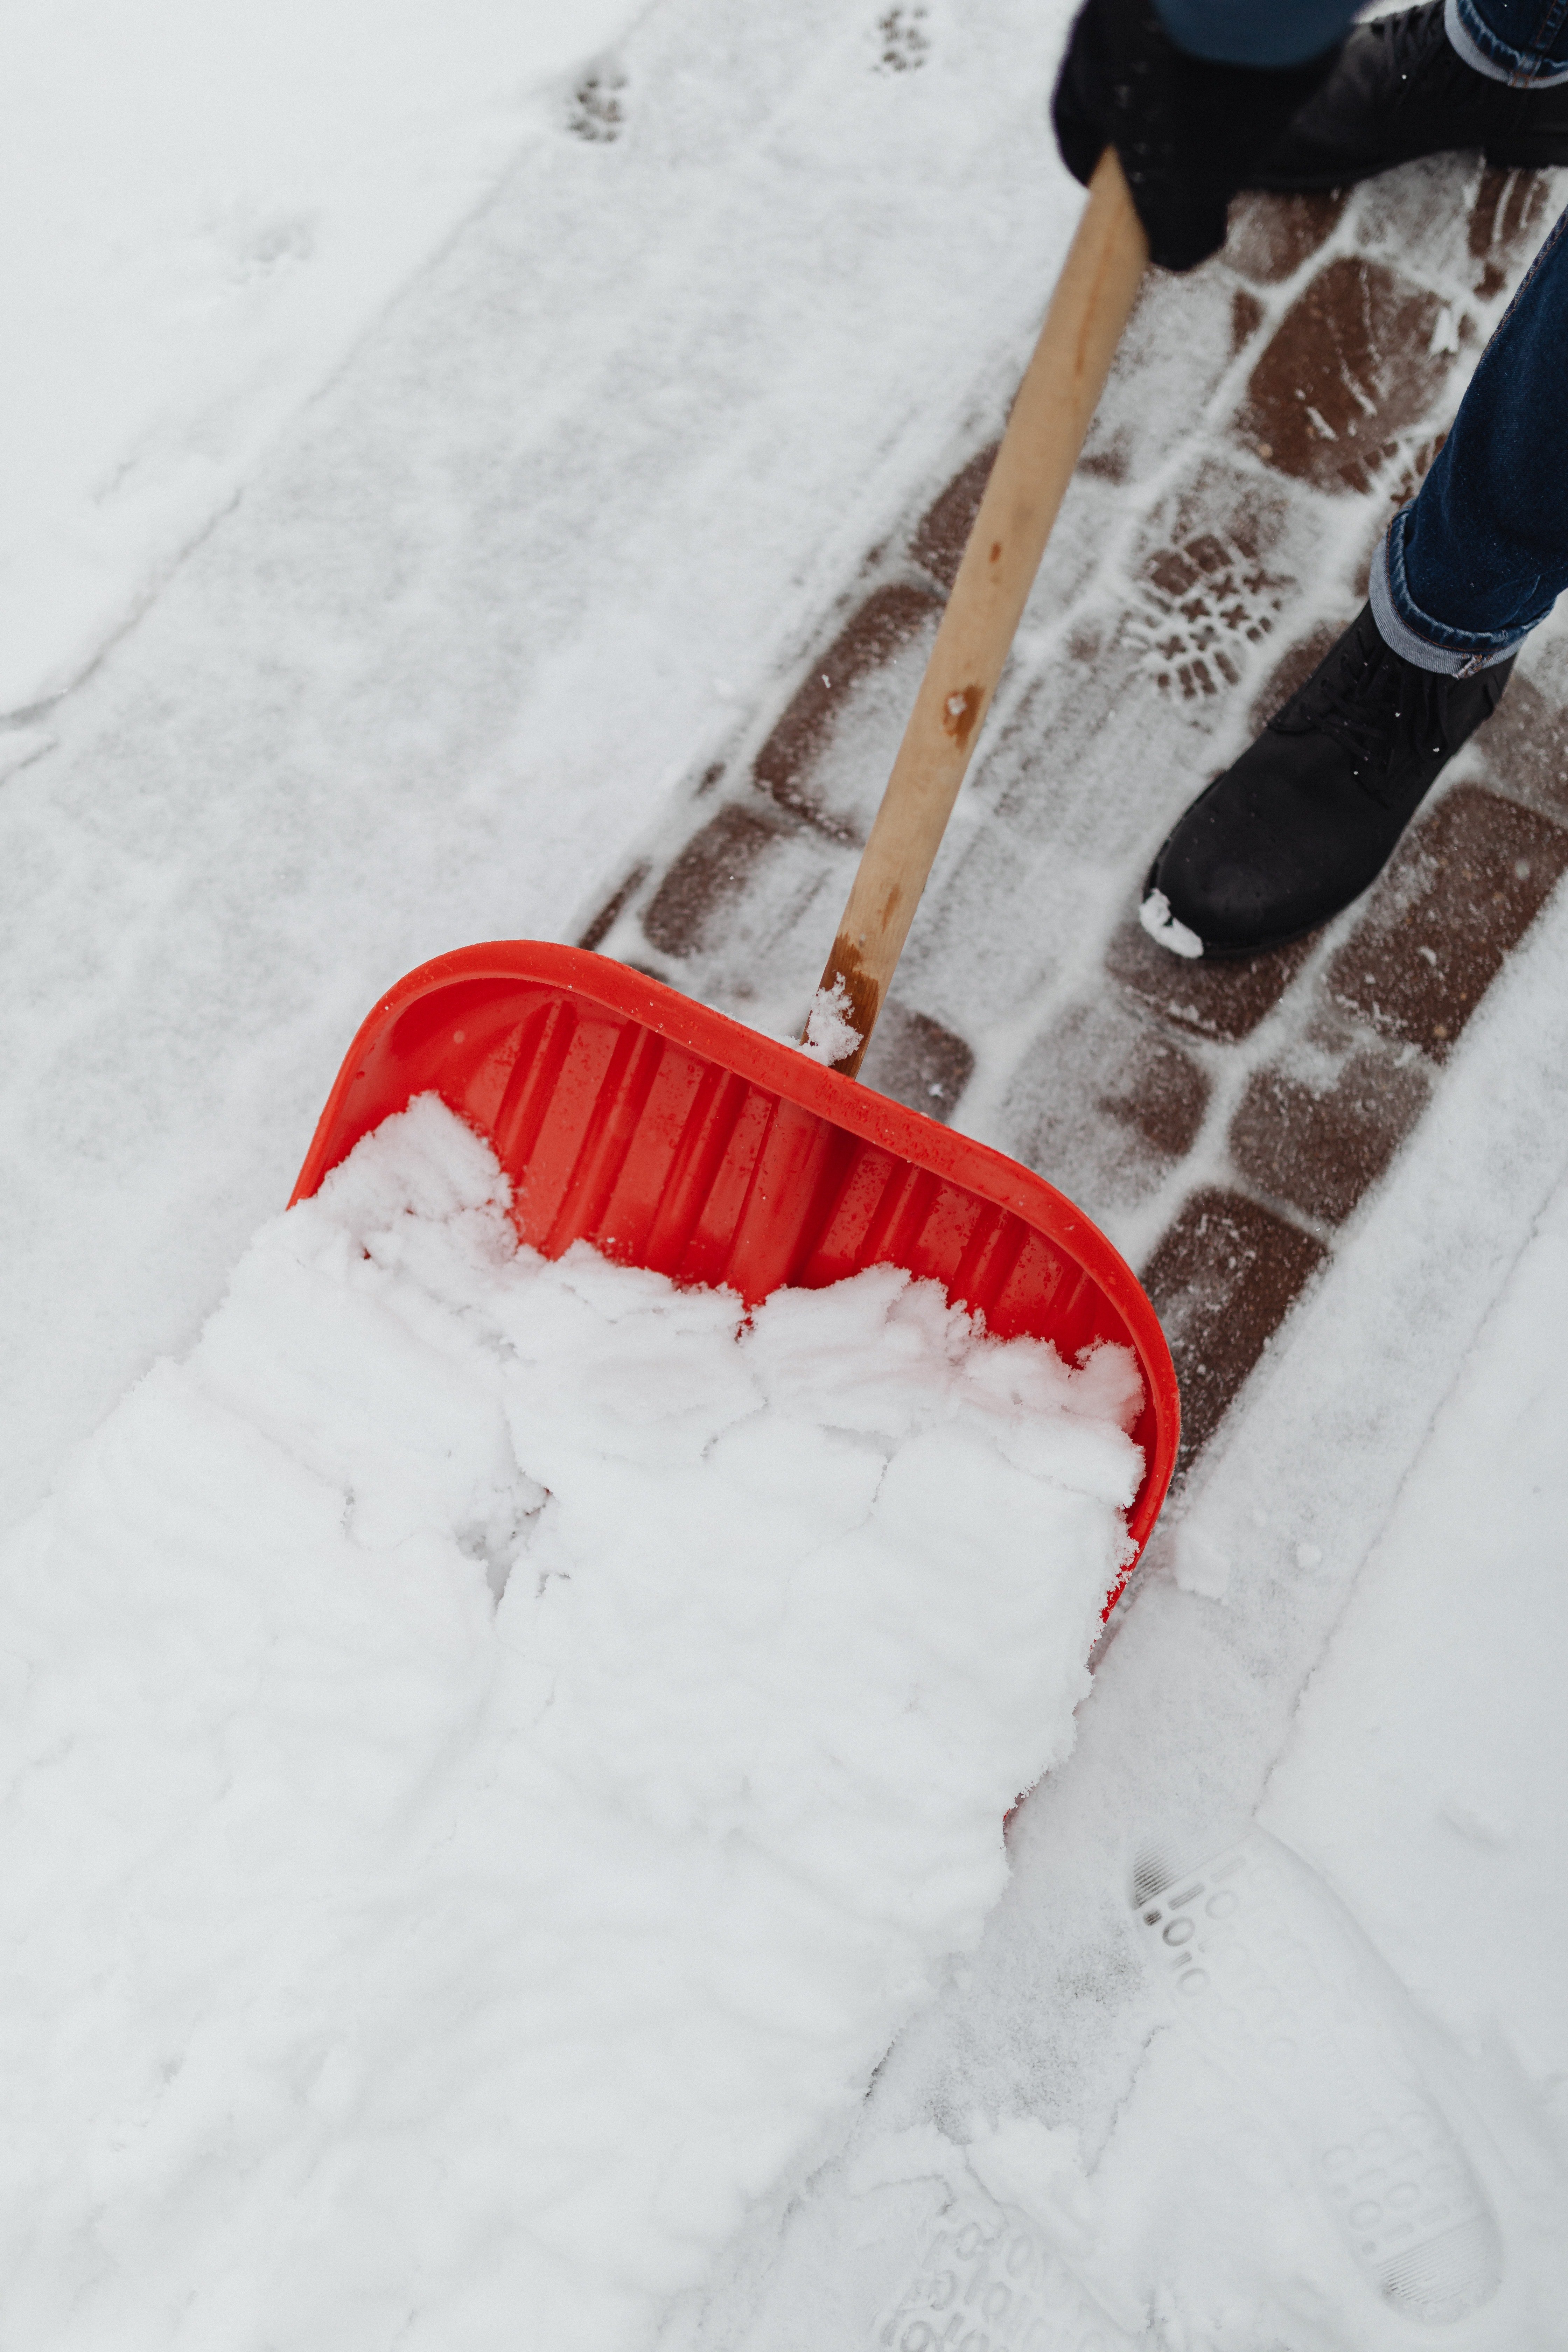 Lucas offered to shovel the snow while Lawrence pushed the cart. | Source: Pexels